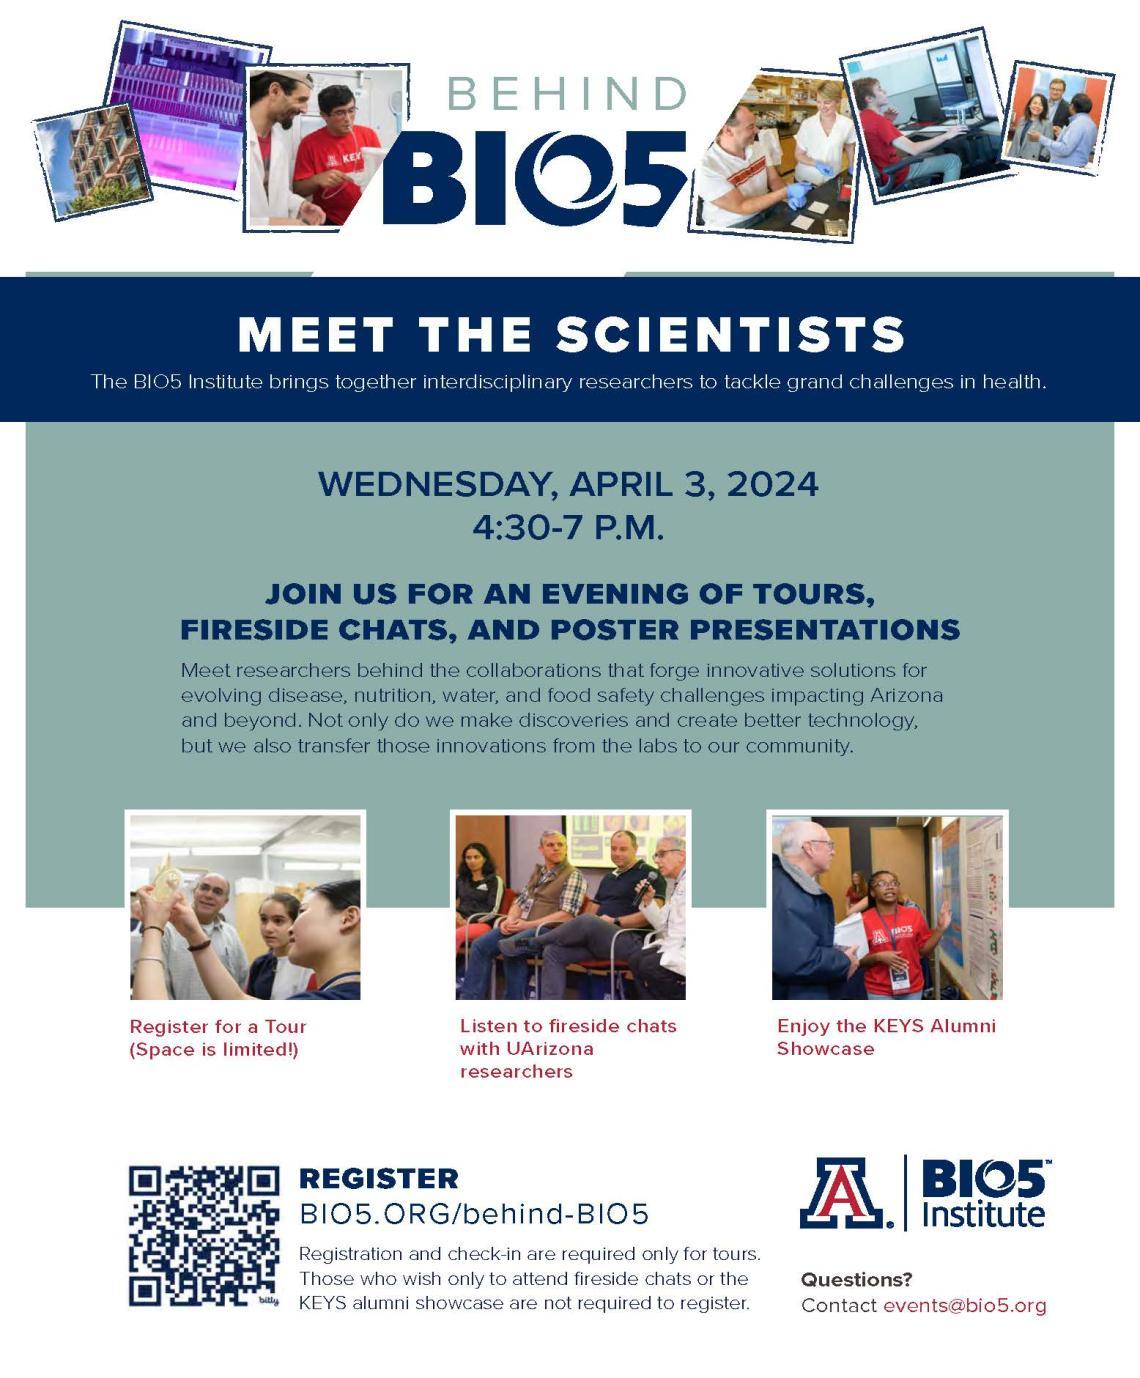 Flier for Behind the Scientists Bio5 event, Weds, April 3, 2024